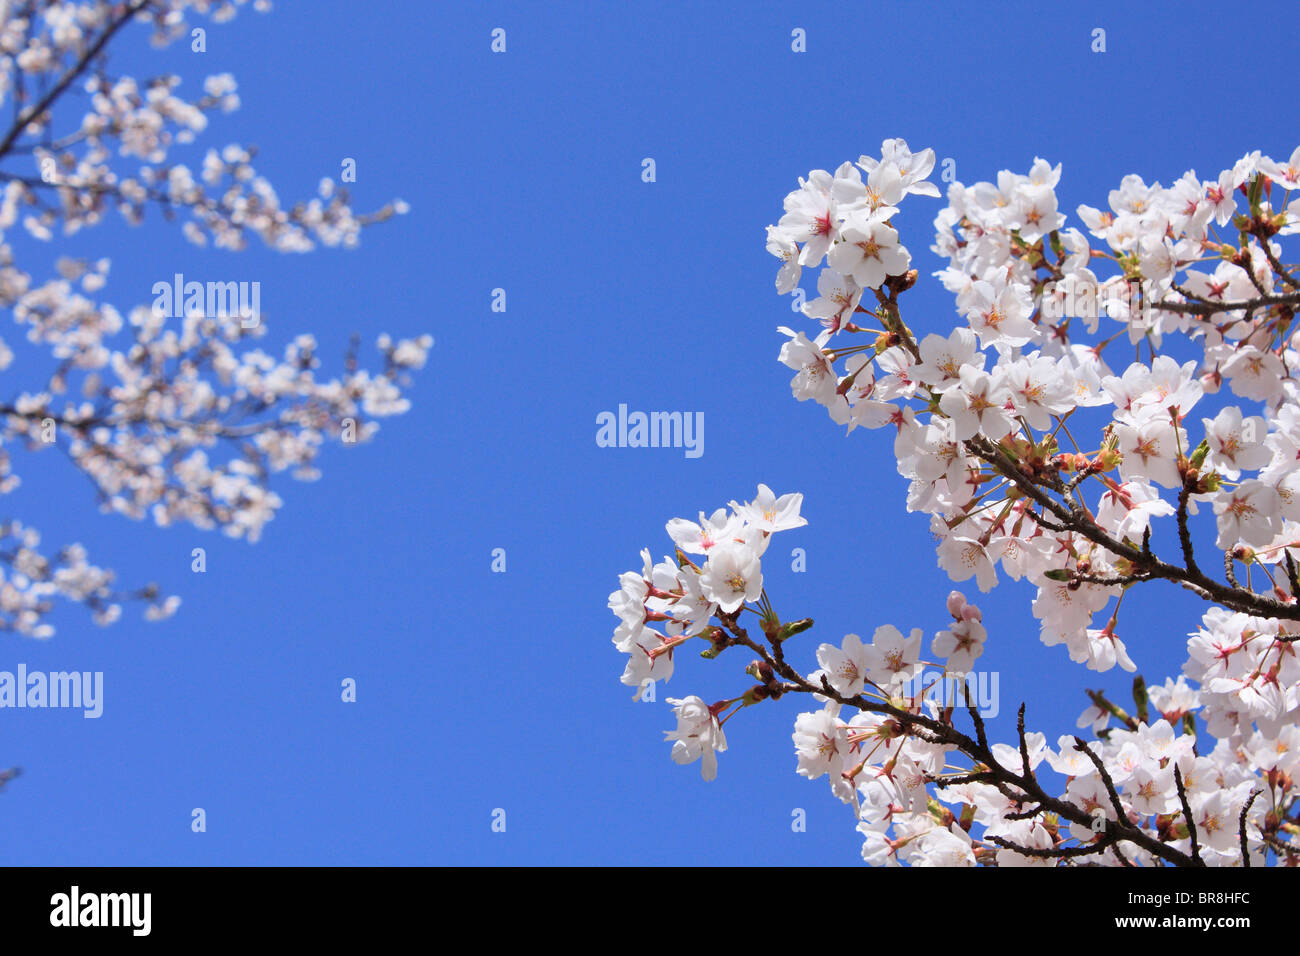 Cherry flowers on branch, close up, blue background Stock Photo